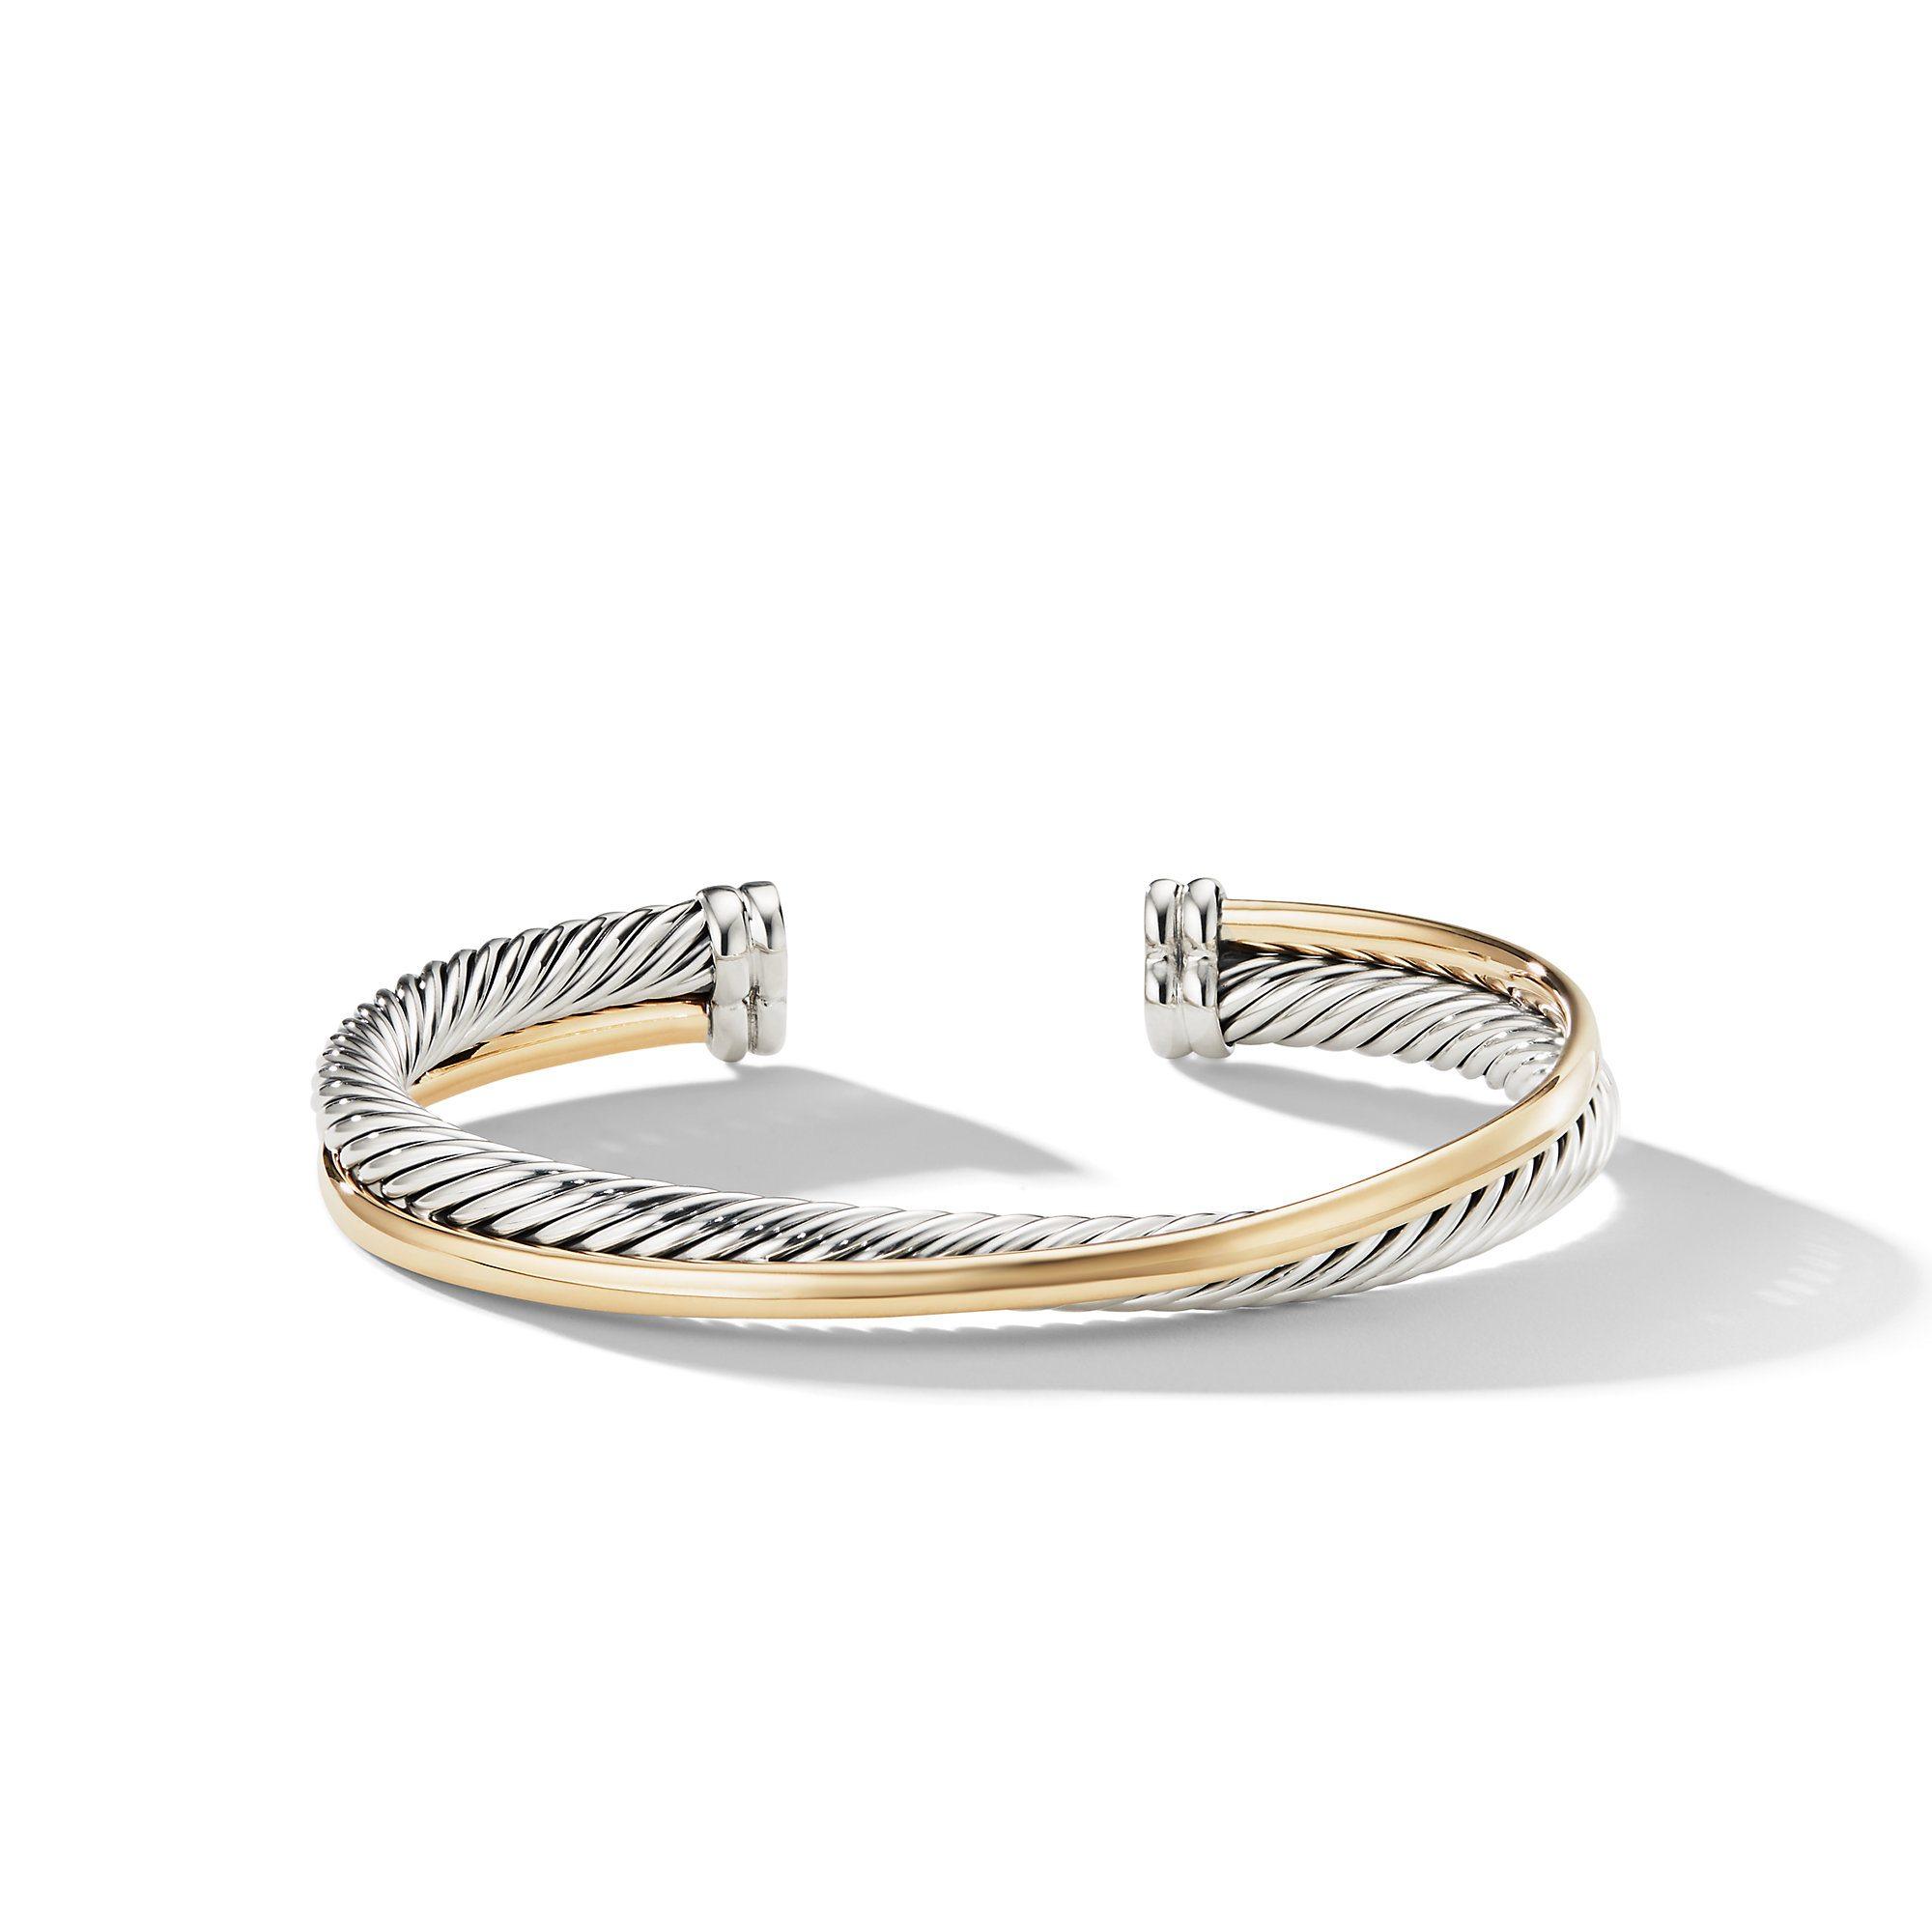 David Yurman 5mm Crossover Cuff with Gold, Size Small